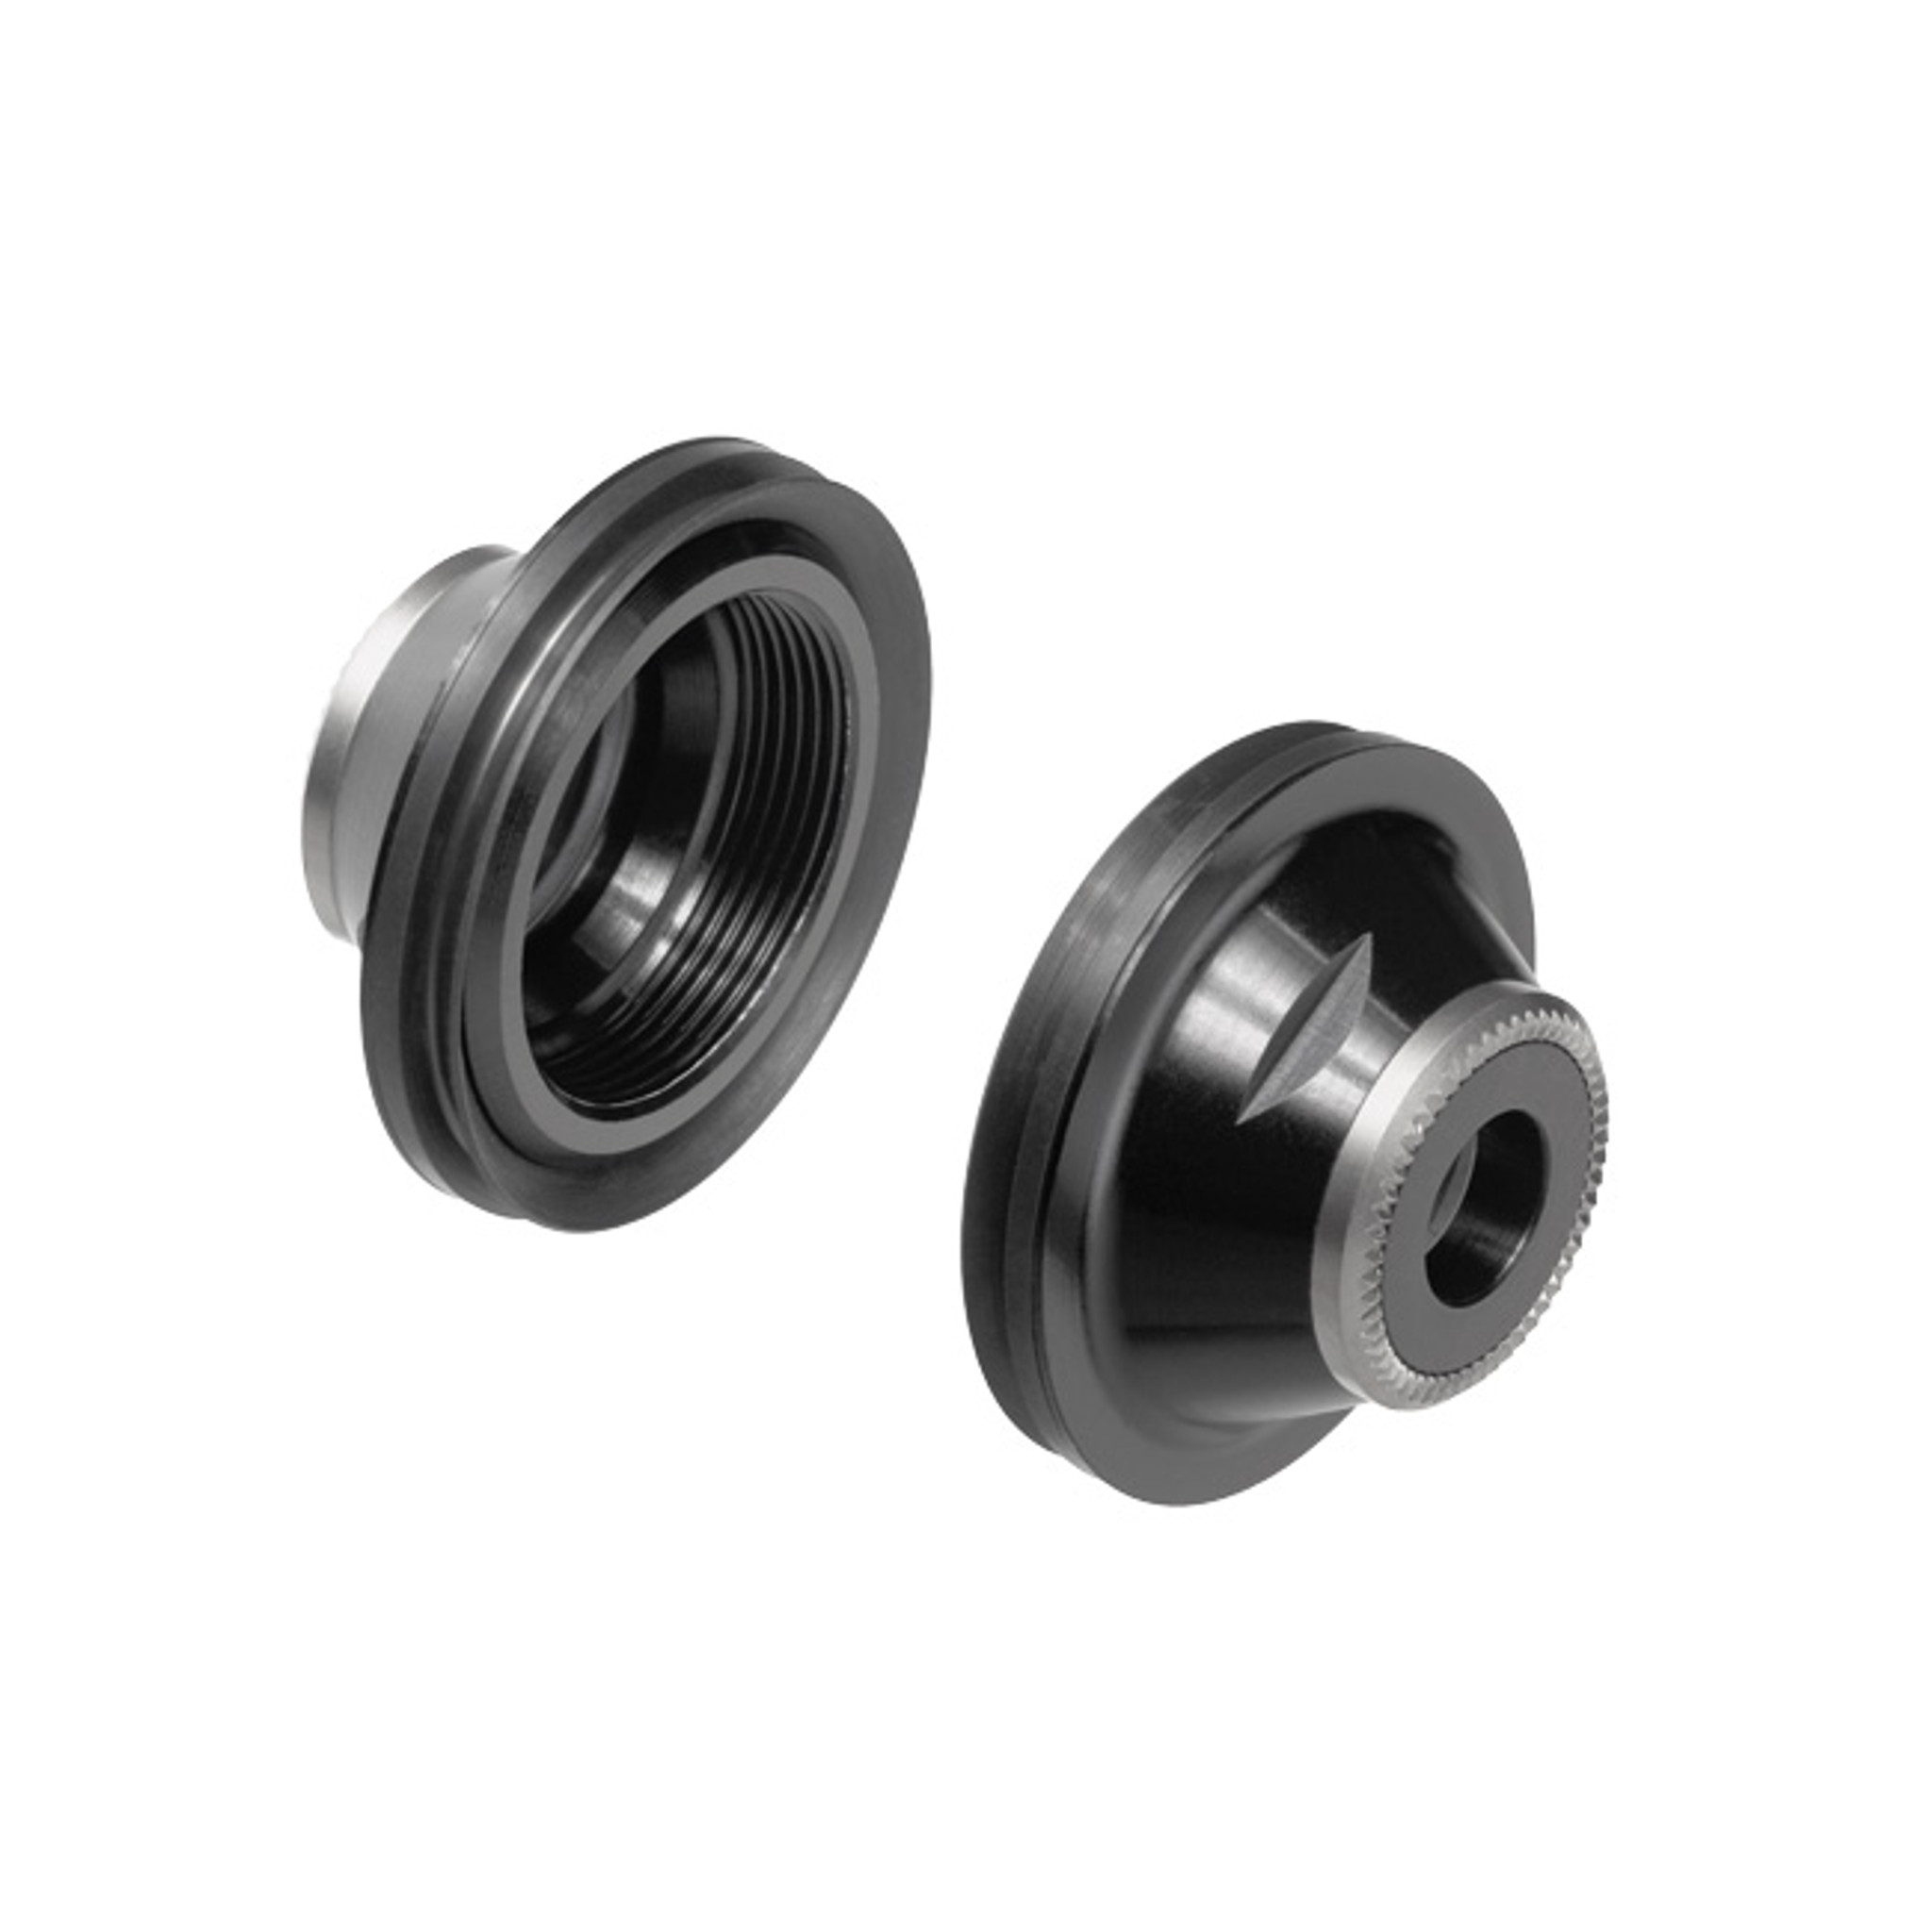 dt swiss 20mm to 15mm adapter